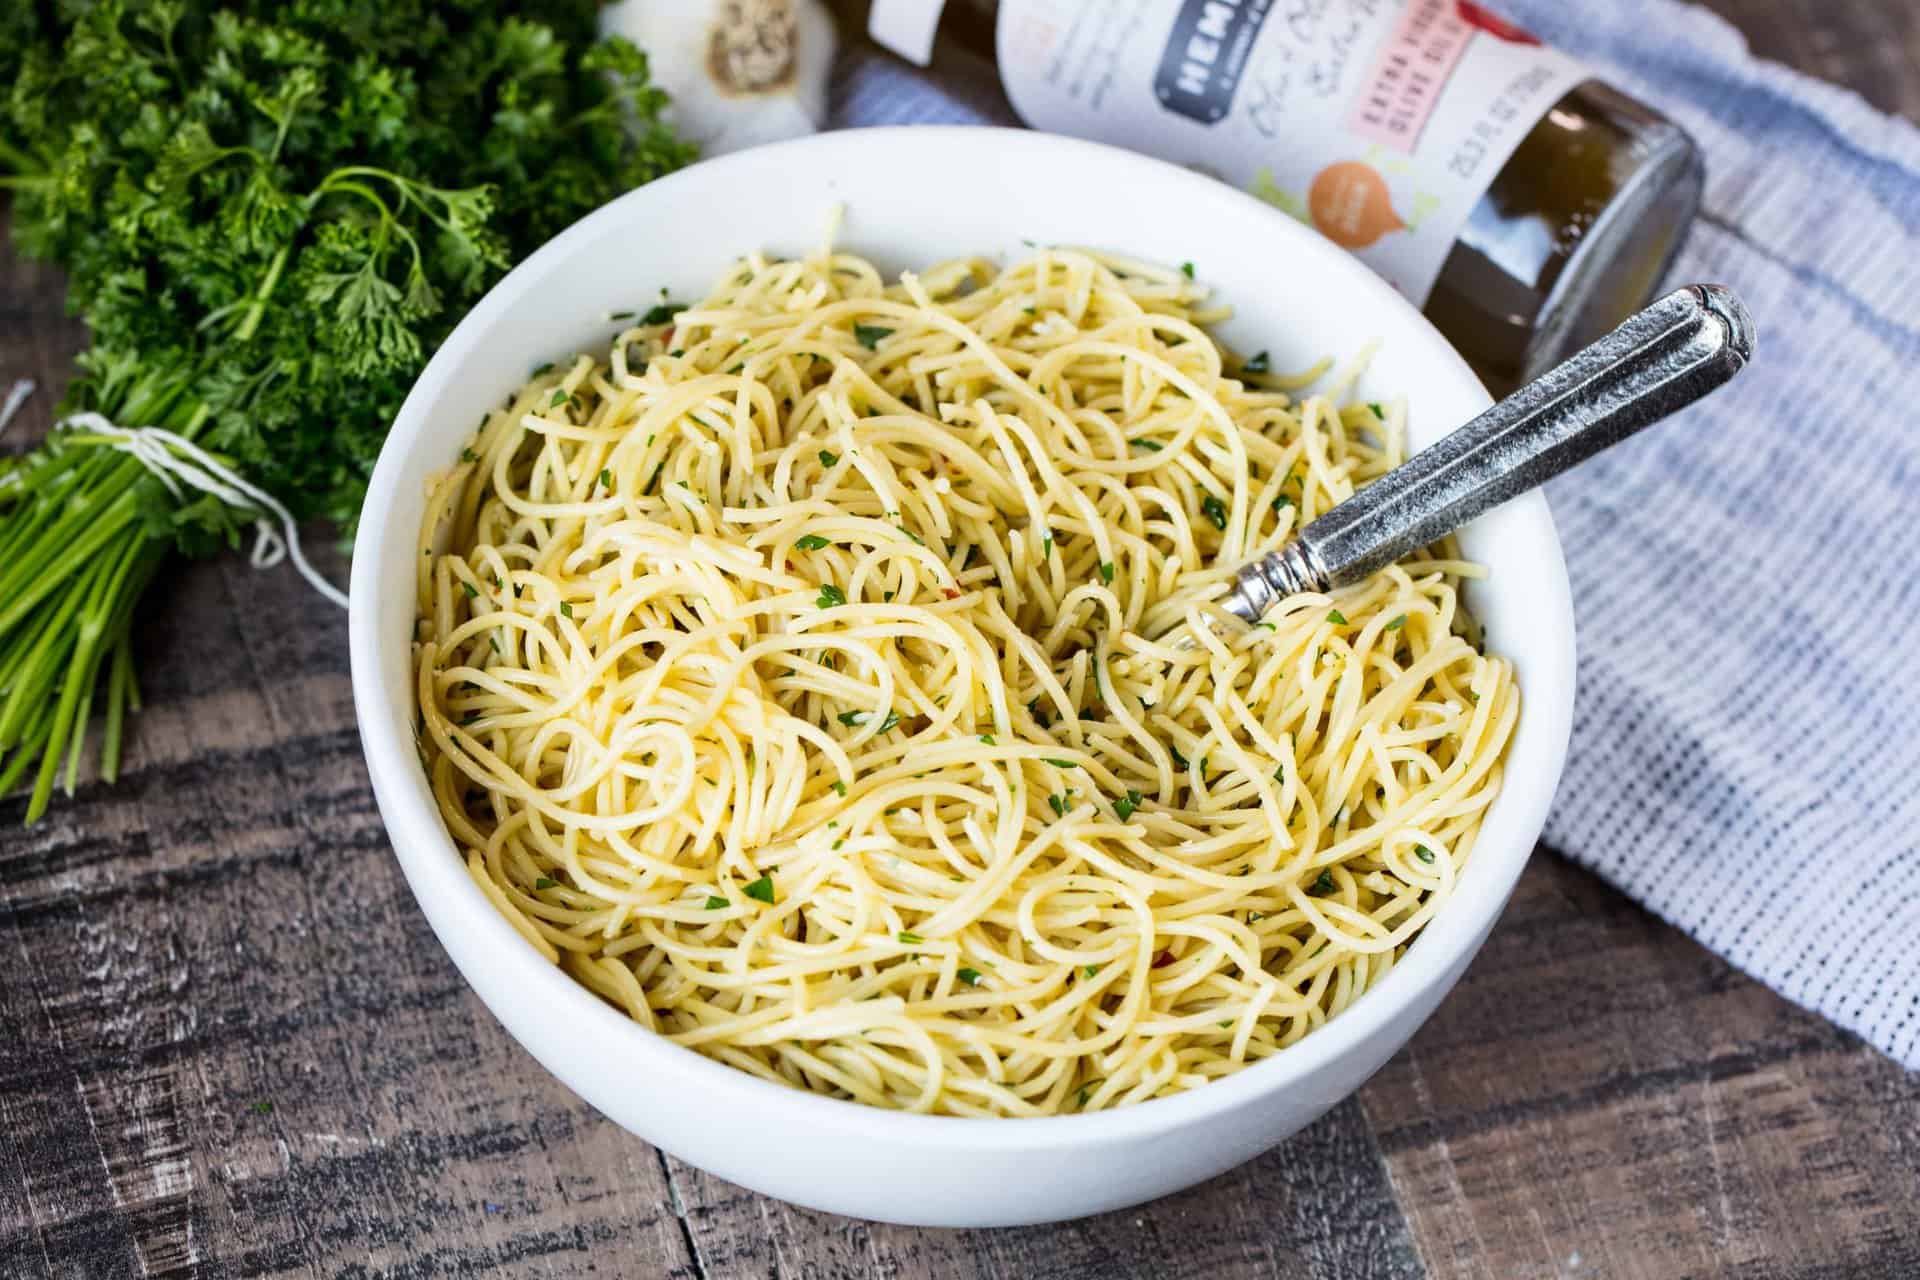 This Super Easy Olive Oil Pasta is a simple side dish that is quick to make and easily customizable to become a full meal. Just add meat and veggies!